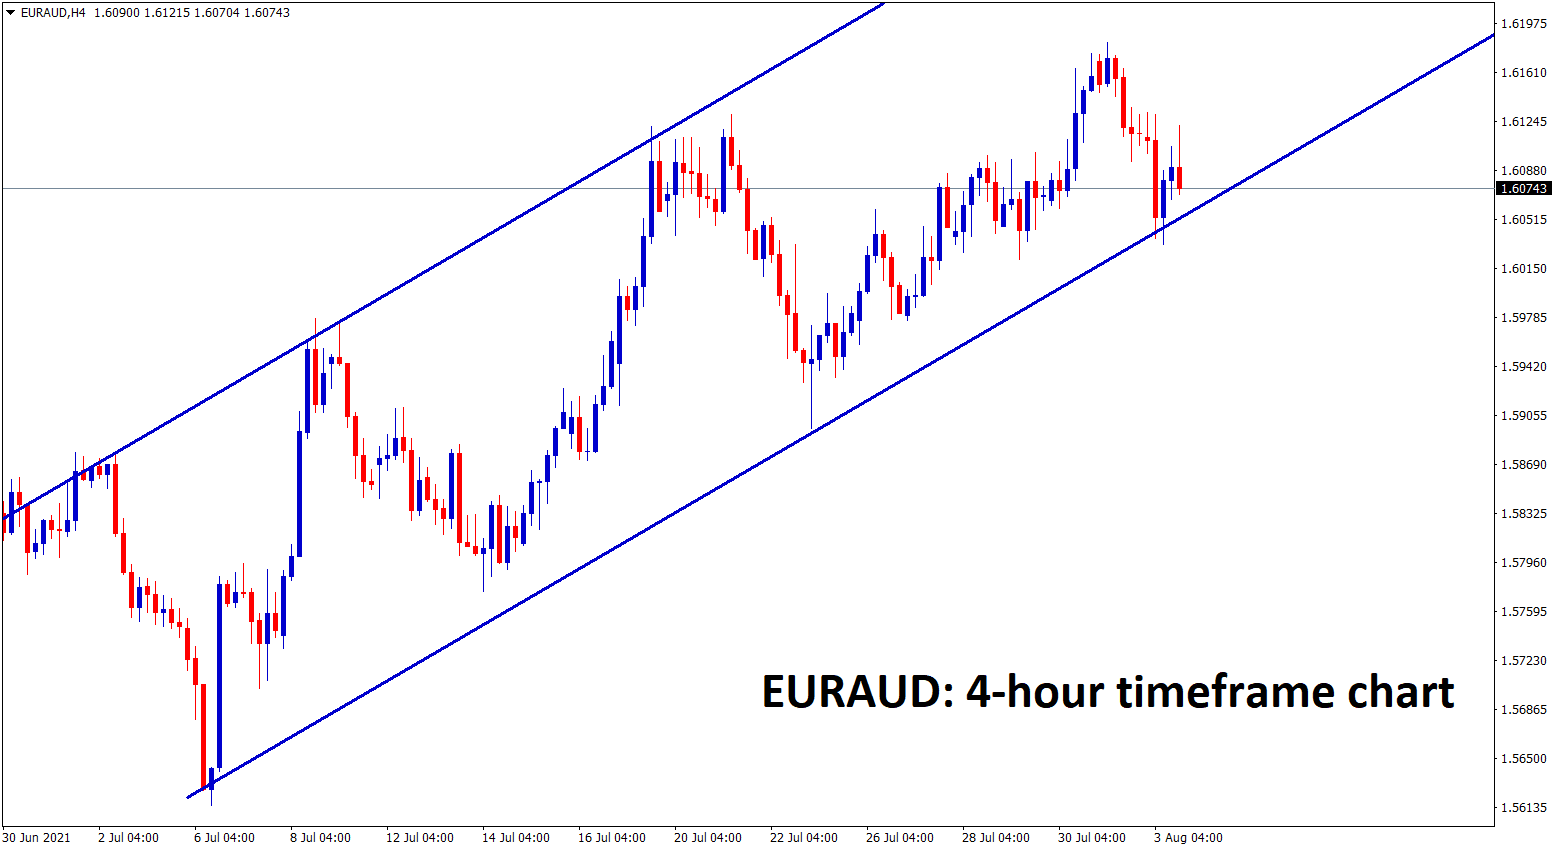 EURAUD is moving in an Ascending channel in 4 hour timeframe